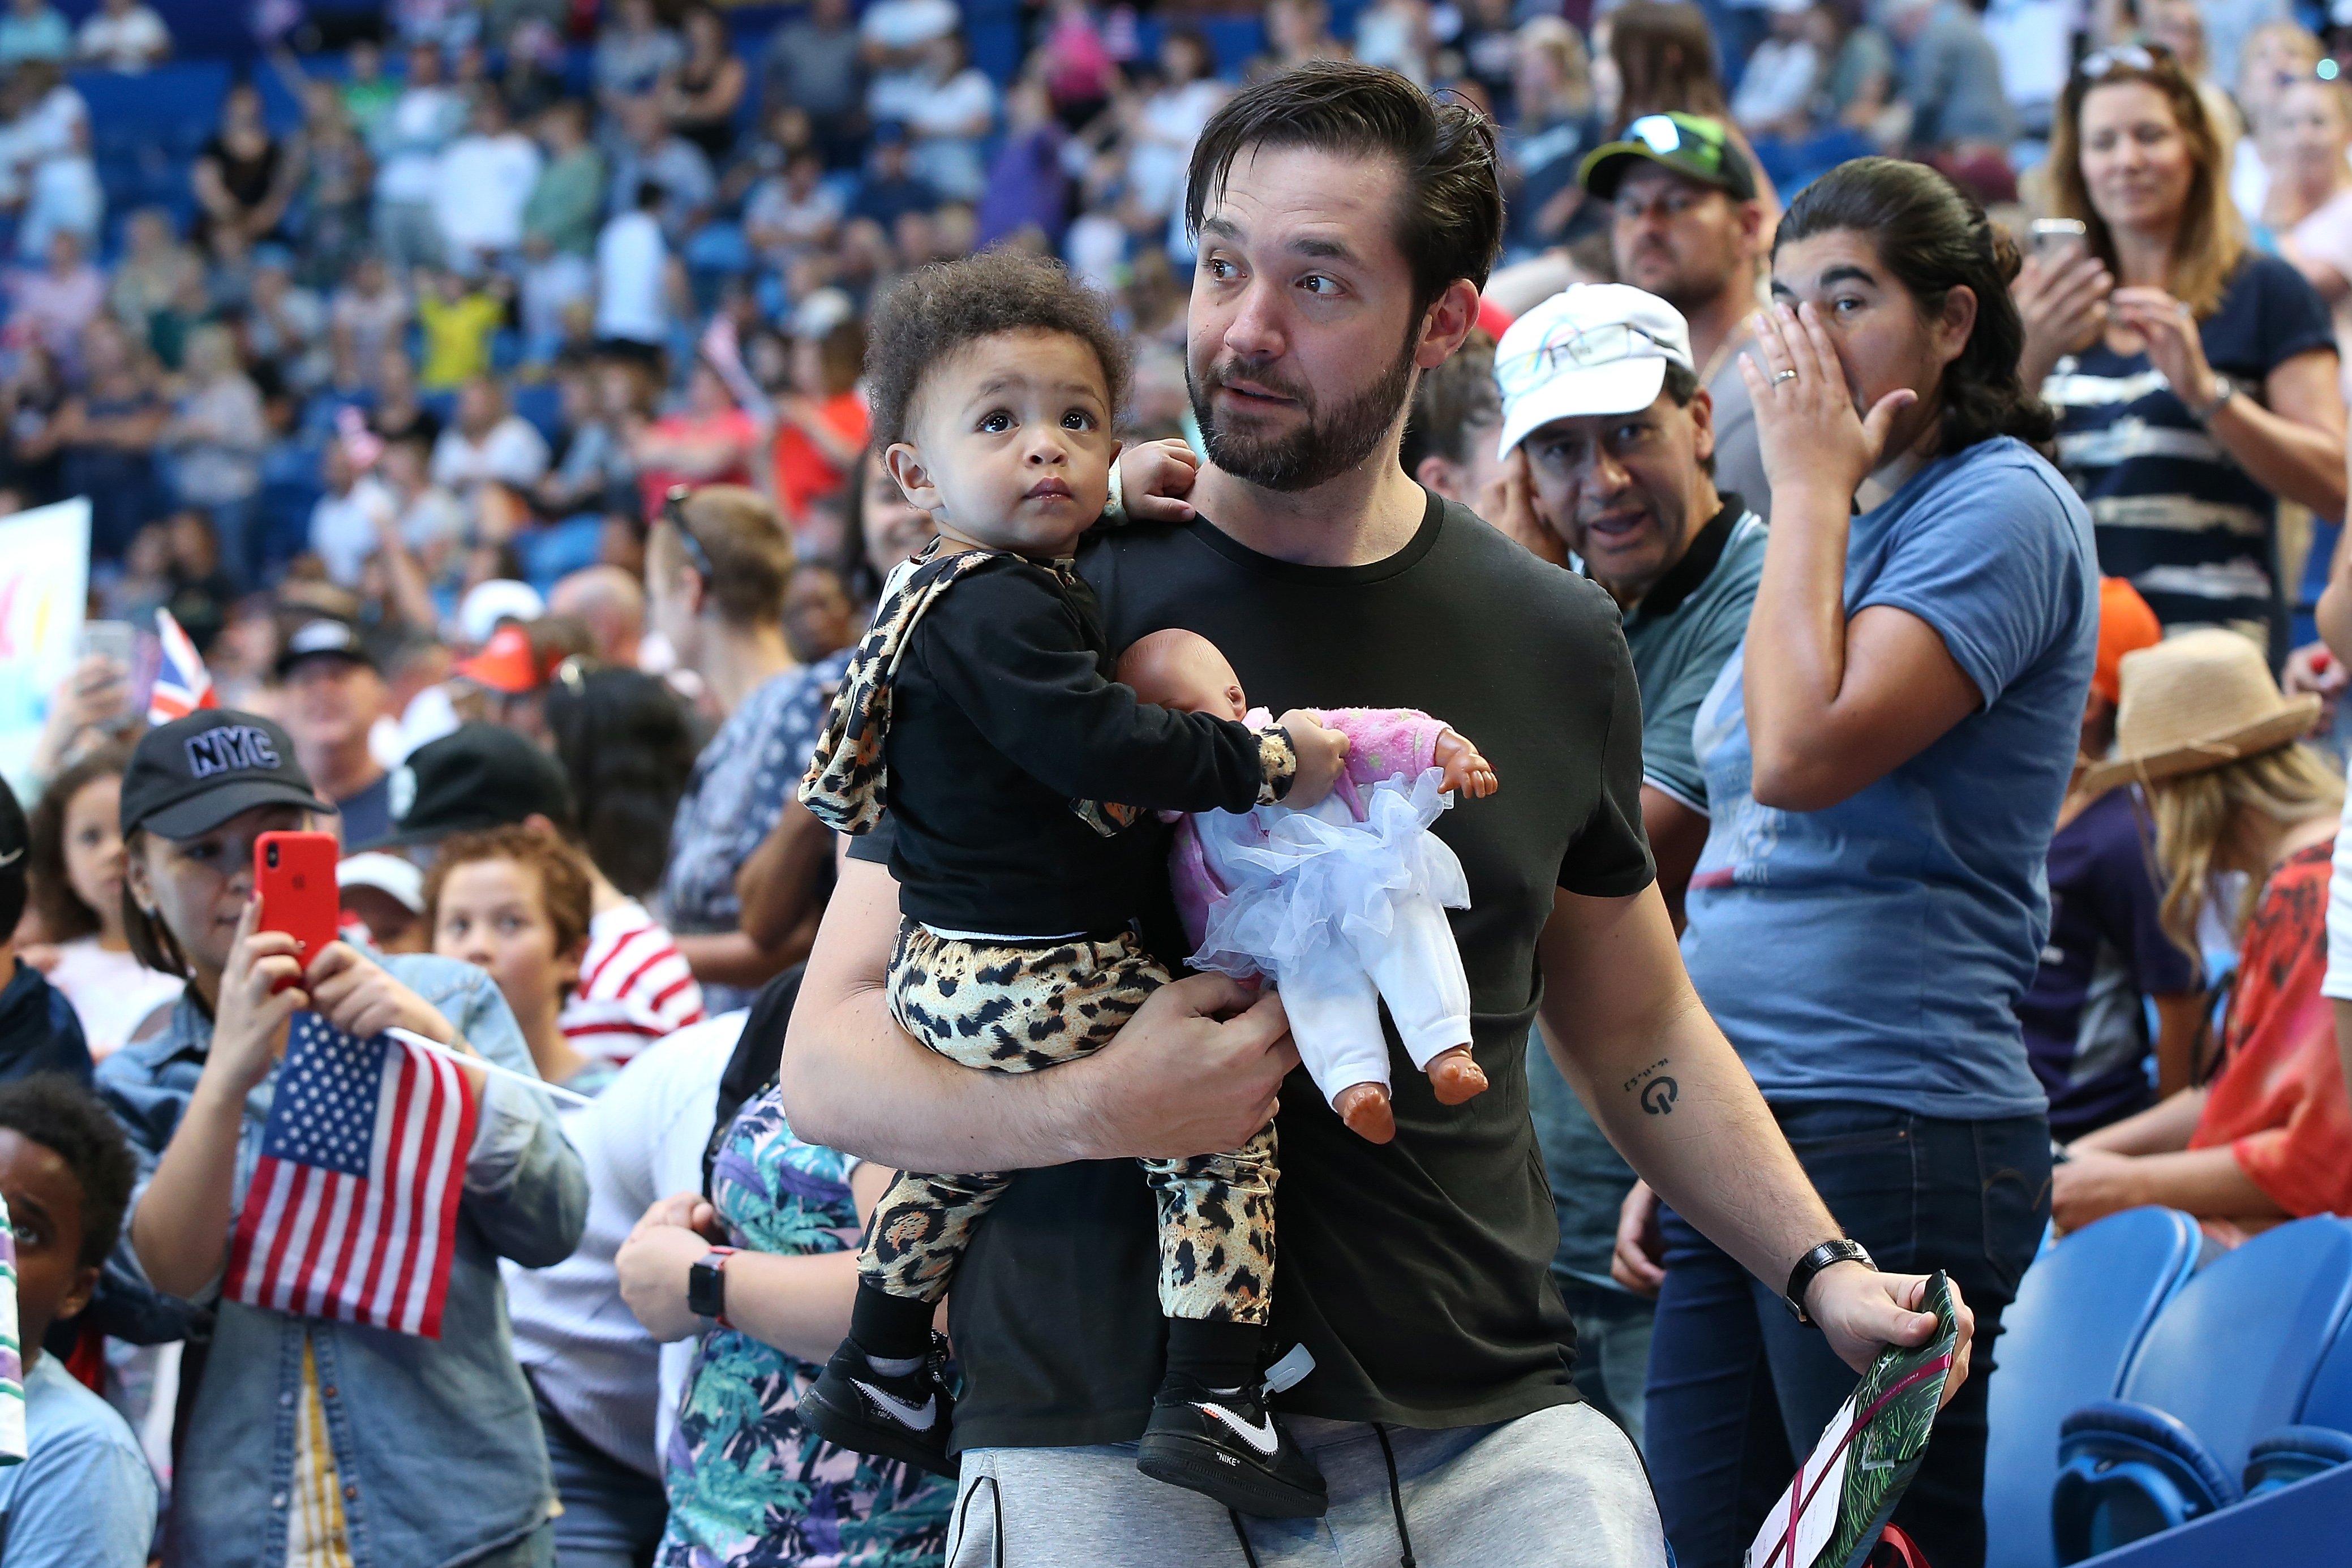 Alexis Ohanian and Alexis Olympia Ohanian Jr. at the women's singles match at the Hopman Cup on January 3, 2019, in Perth, Australia | Source: Getty Images